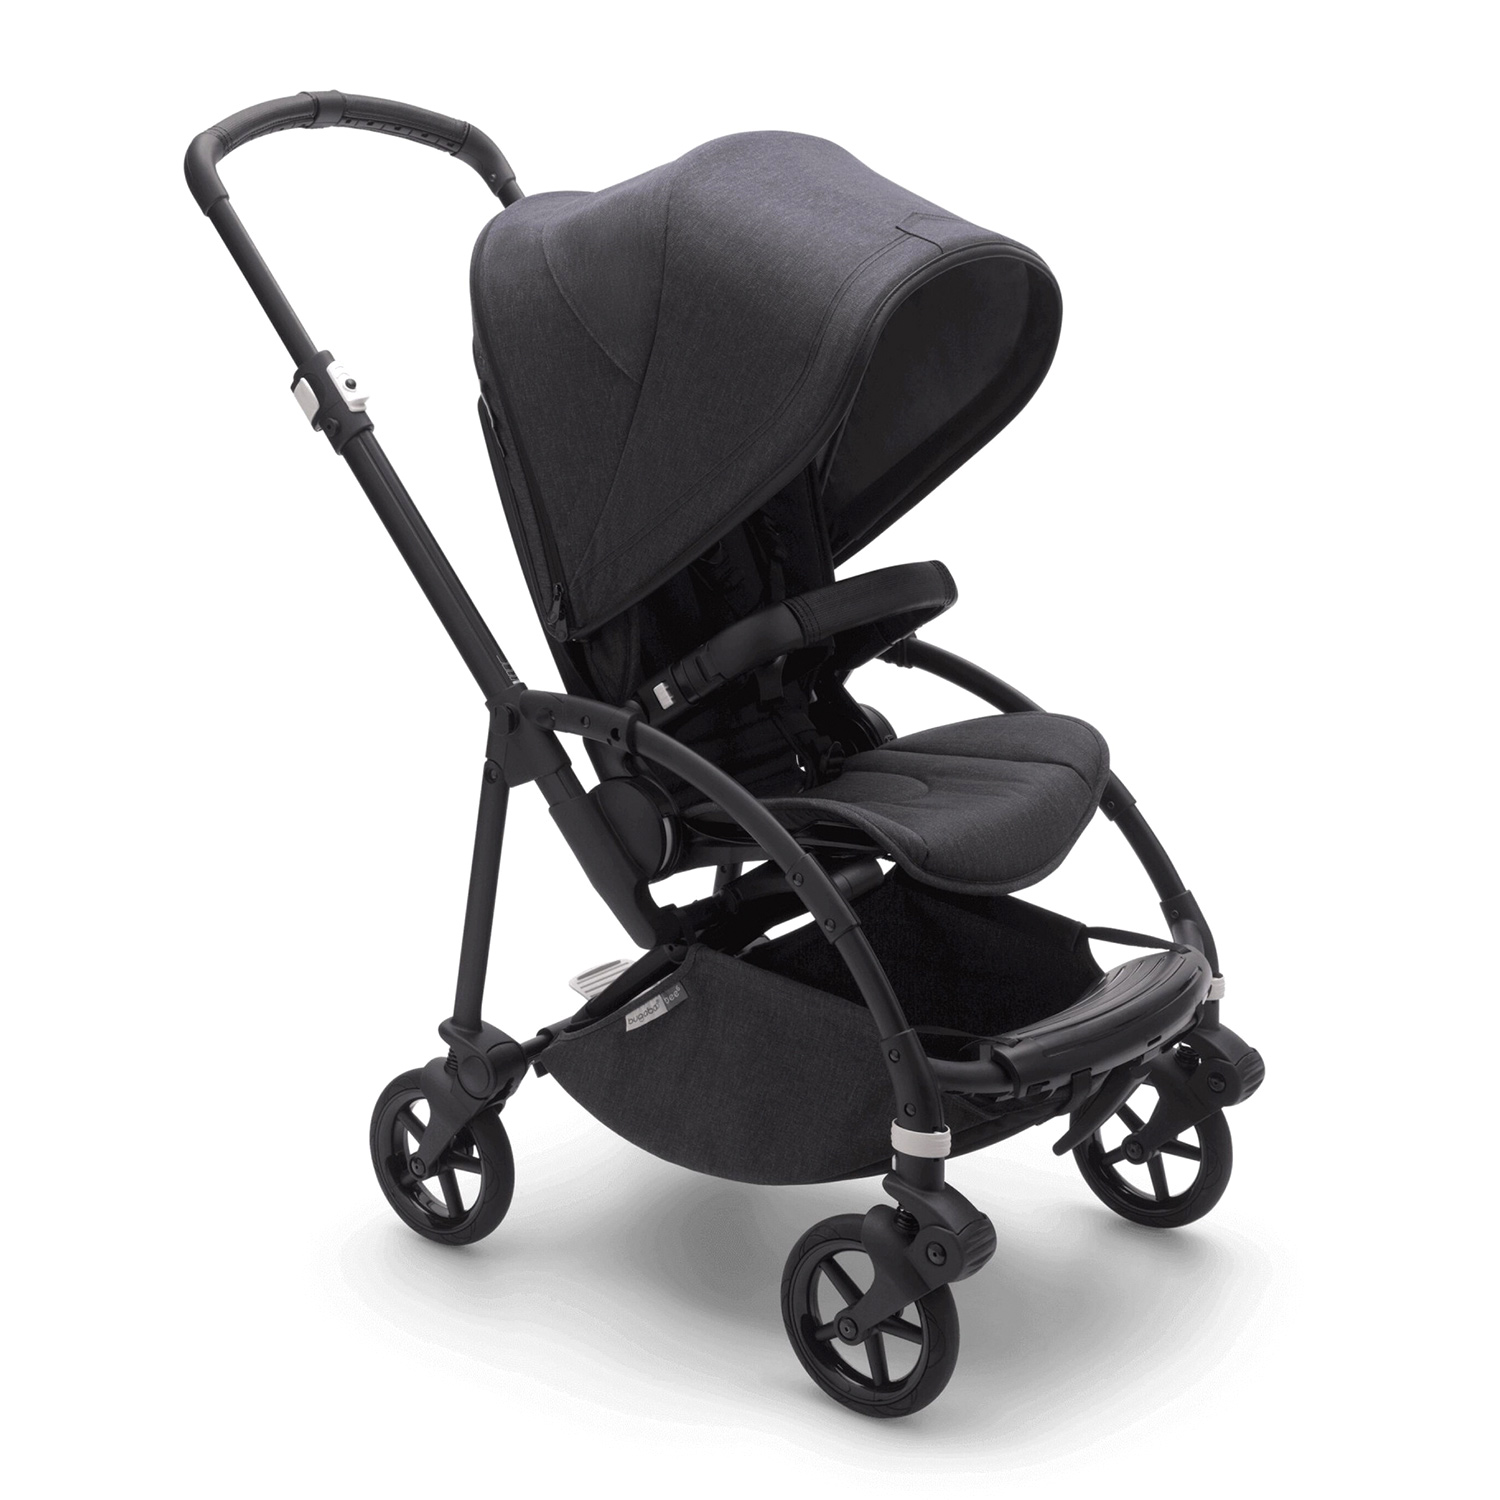 Коляска прогулочная Bee6 Complete MINERAL BLACK/WASHED BL Bugaboo прогулочная коляска bugaboo bee 6 complete